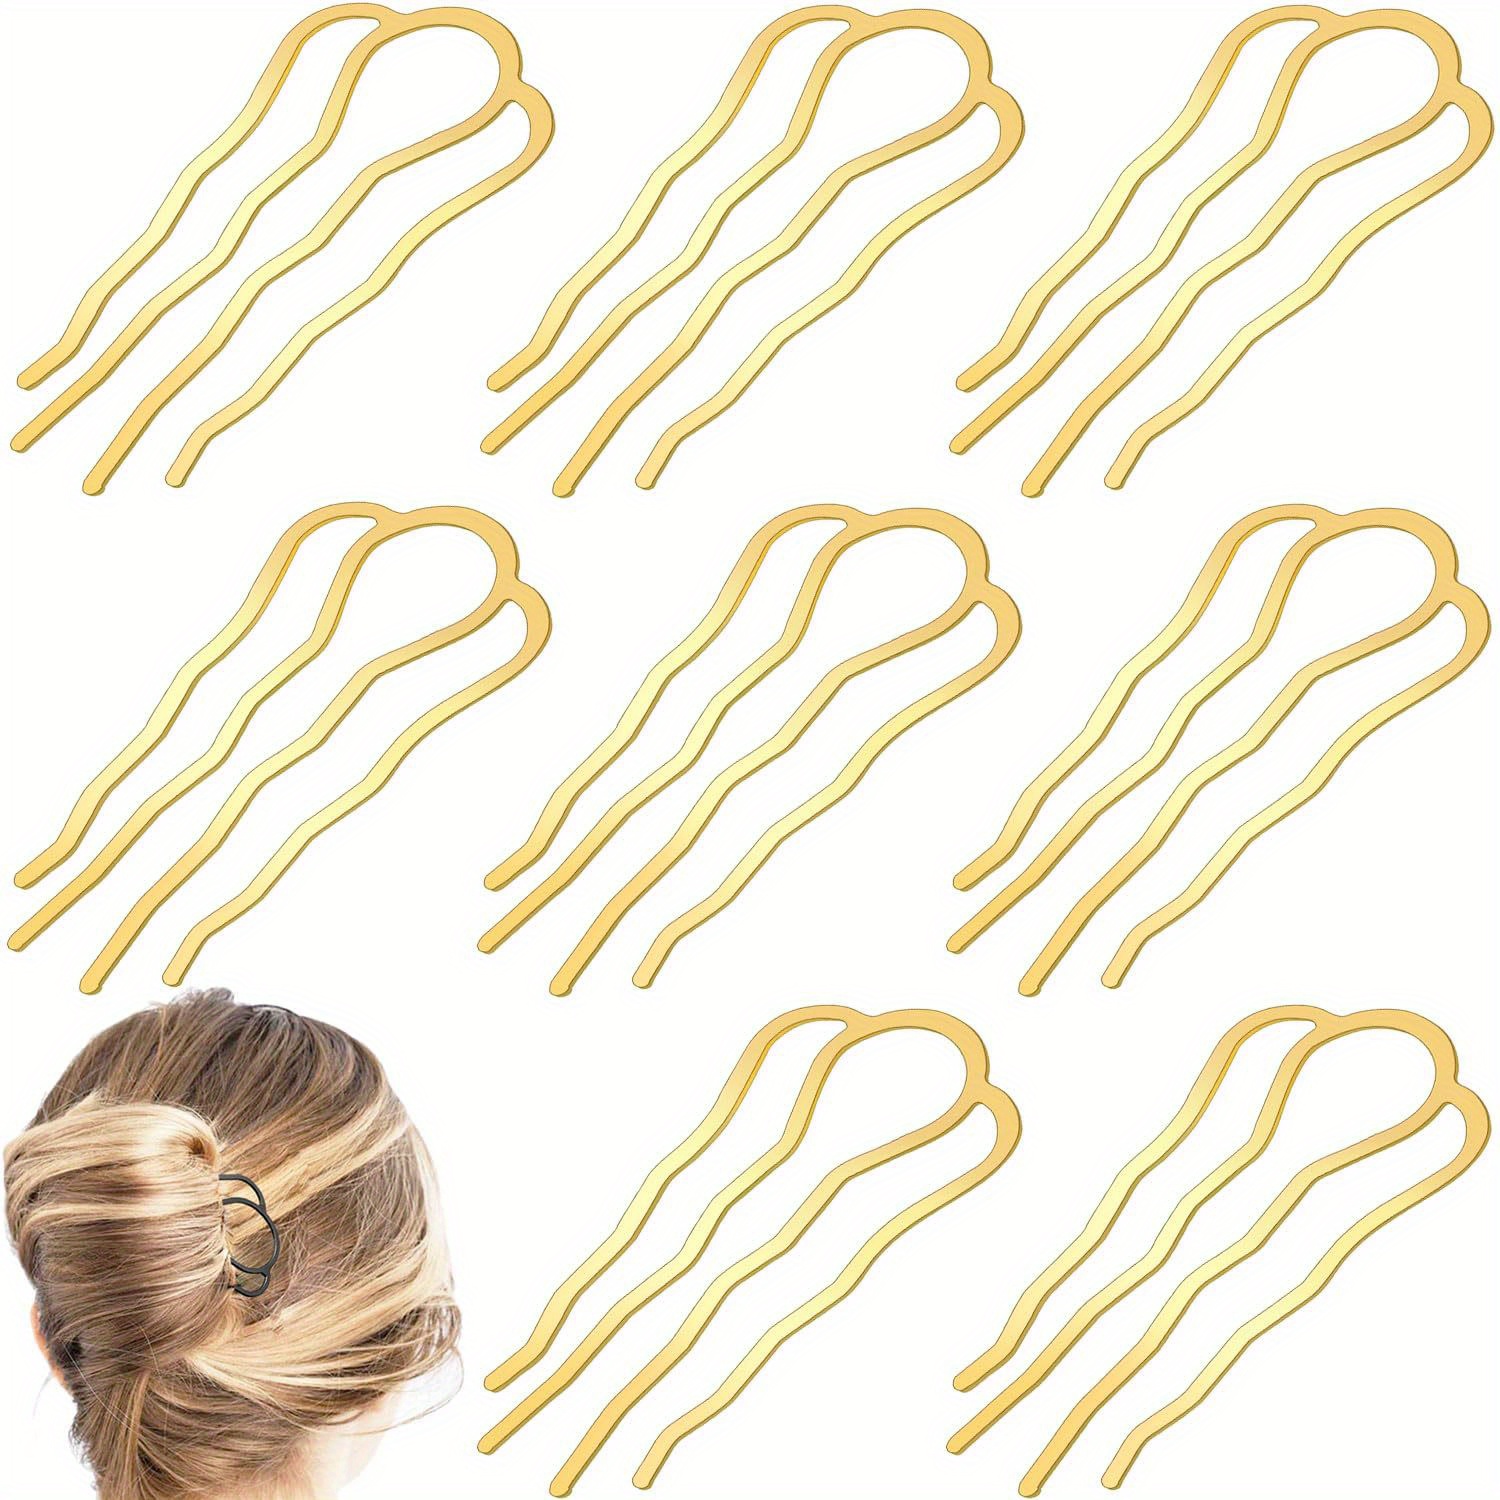 

Elegant Golden U-shaped Hair Combs - Metal Hair Fork Clips For Buns & Updos, Perfect Wedding Hair Styling Accessories For Women Add A Sparkle To Your Everyday Hairstyles